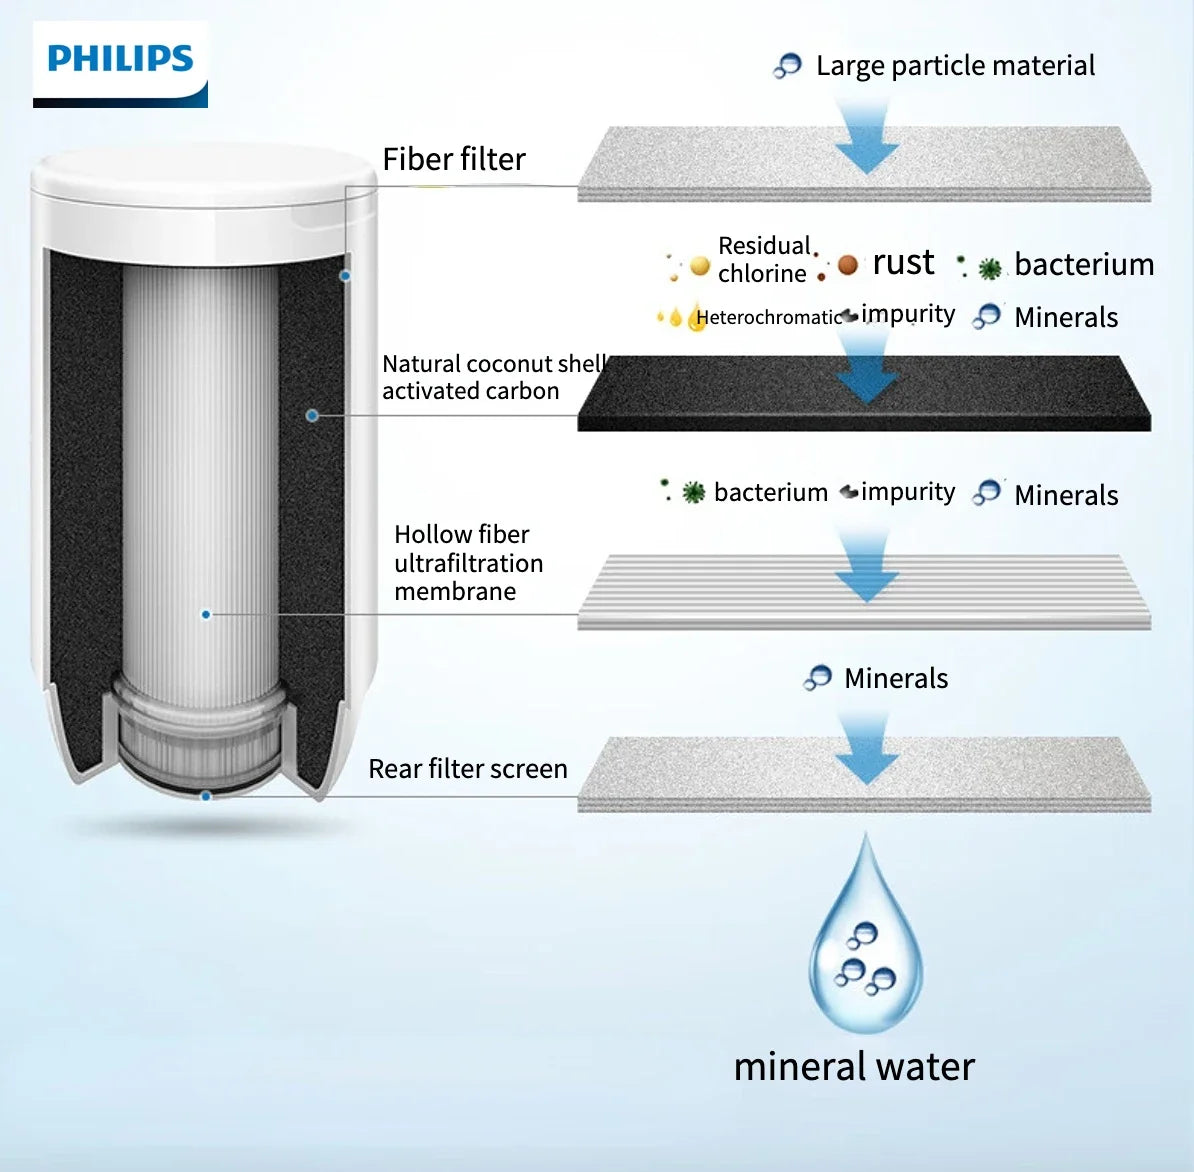 Philips Water Purification Equipment Faucet Water Purifier Kitchen Tapwater Purifier Use Hollow Fiber Ultrafiltration Membranes